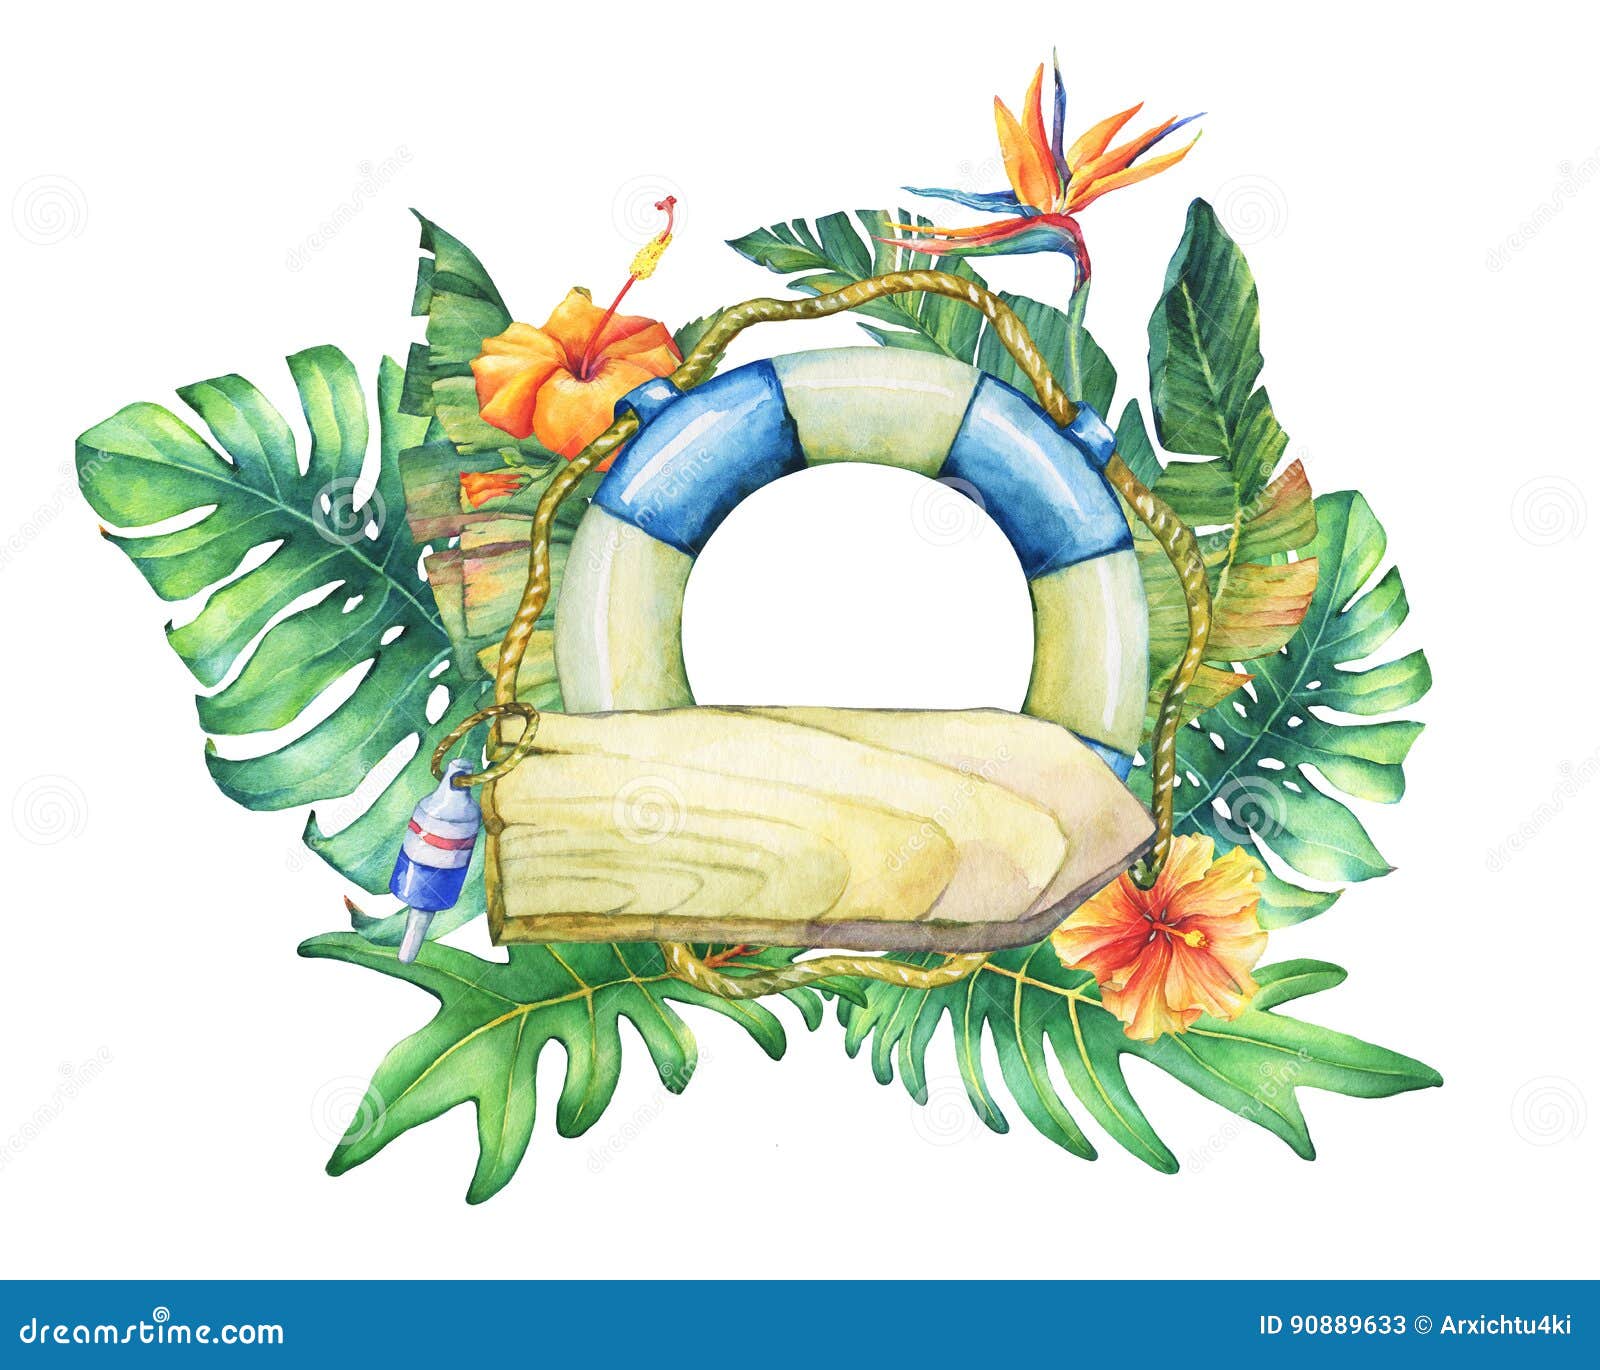 circle frame with lifebuoy, nameplate, flowers and tropical plants.